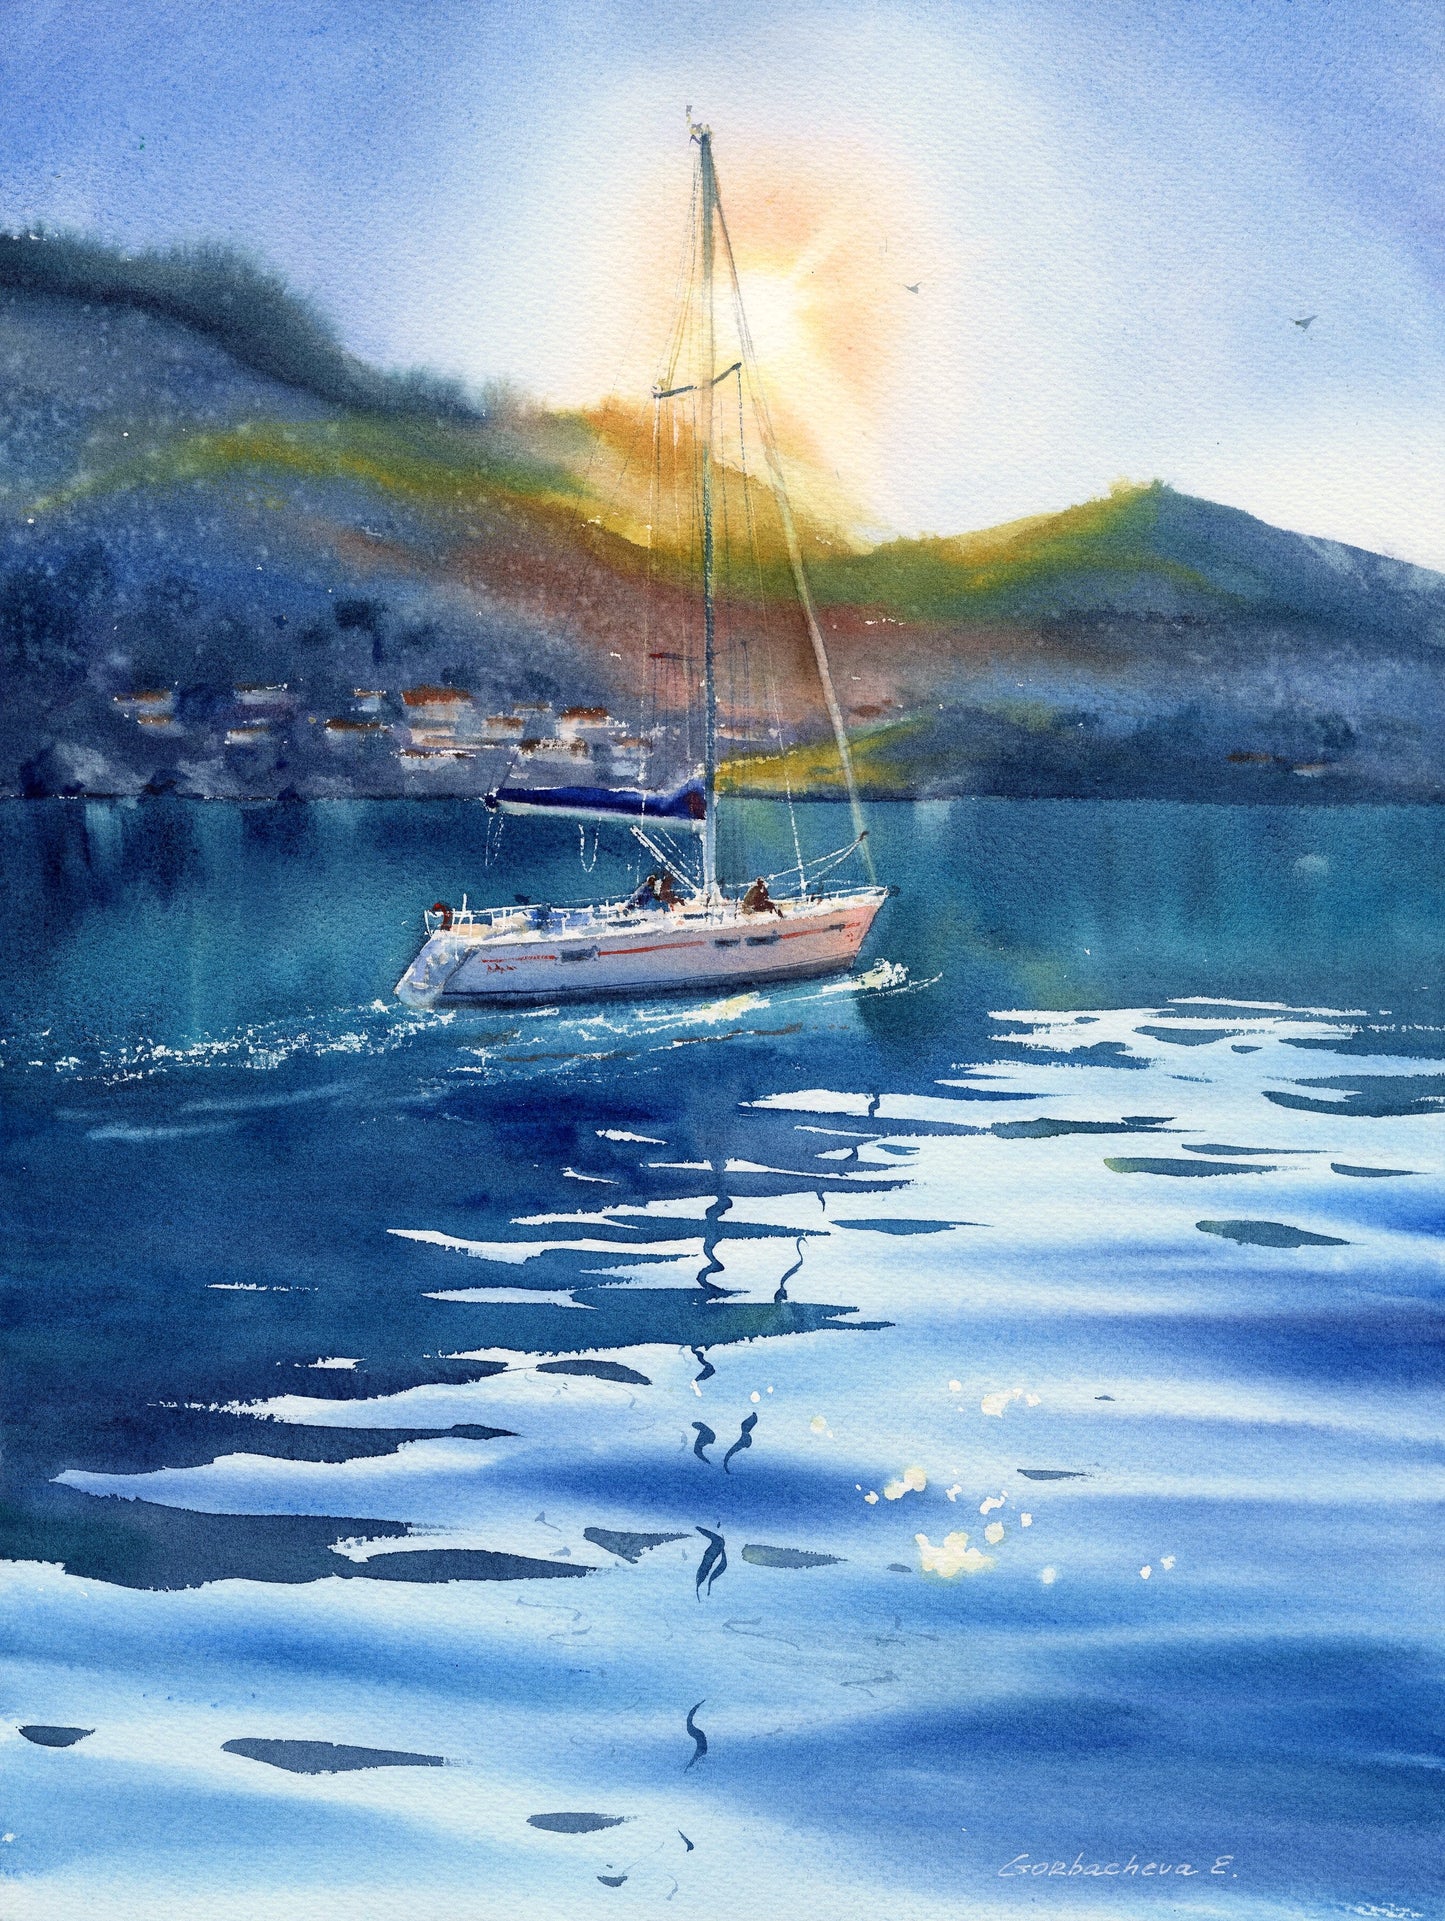 Yachting Painting Original Watercolor, Seascape Artwork - Yacht in the sun - 12x16 inch